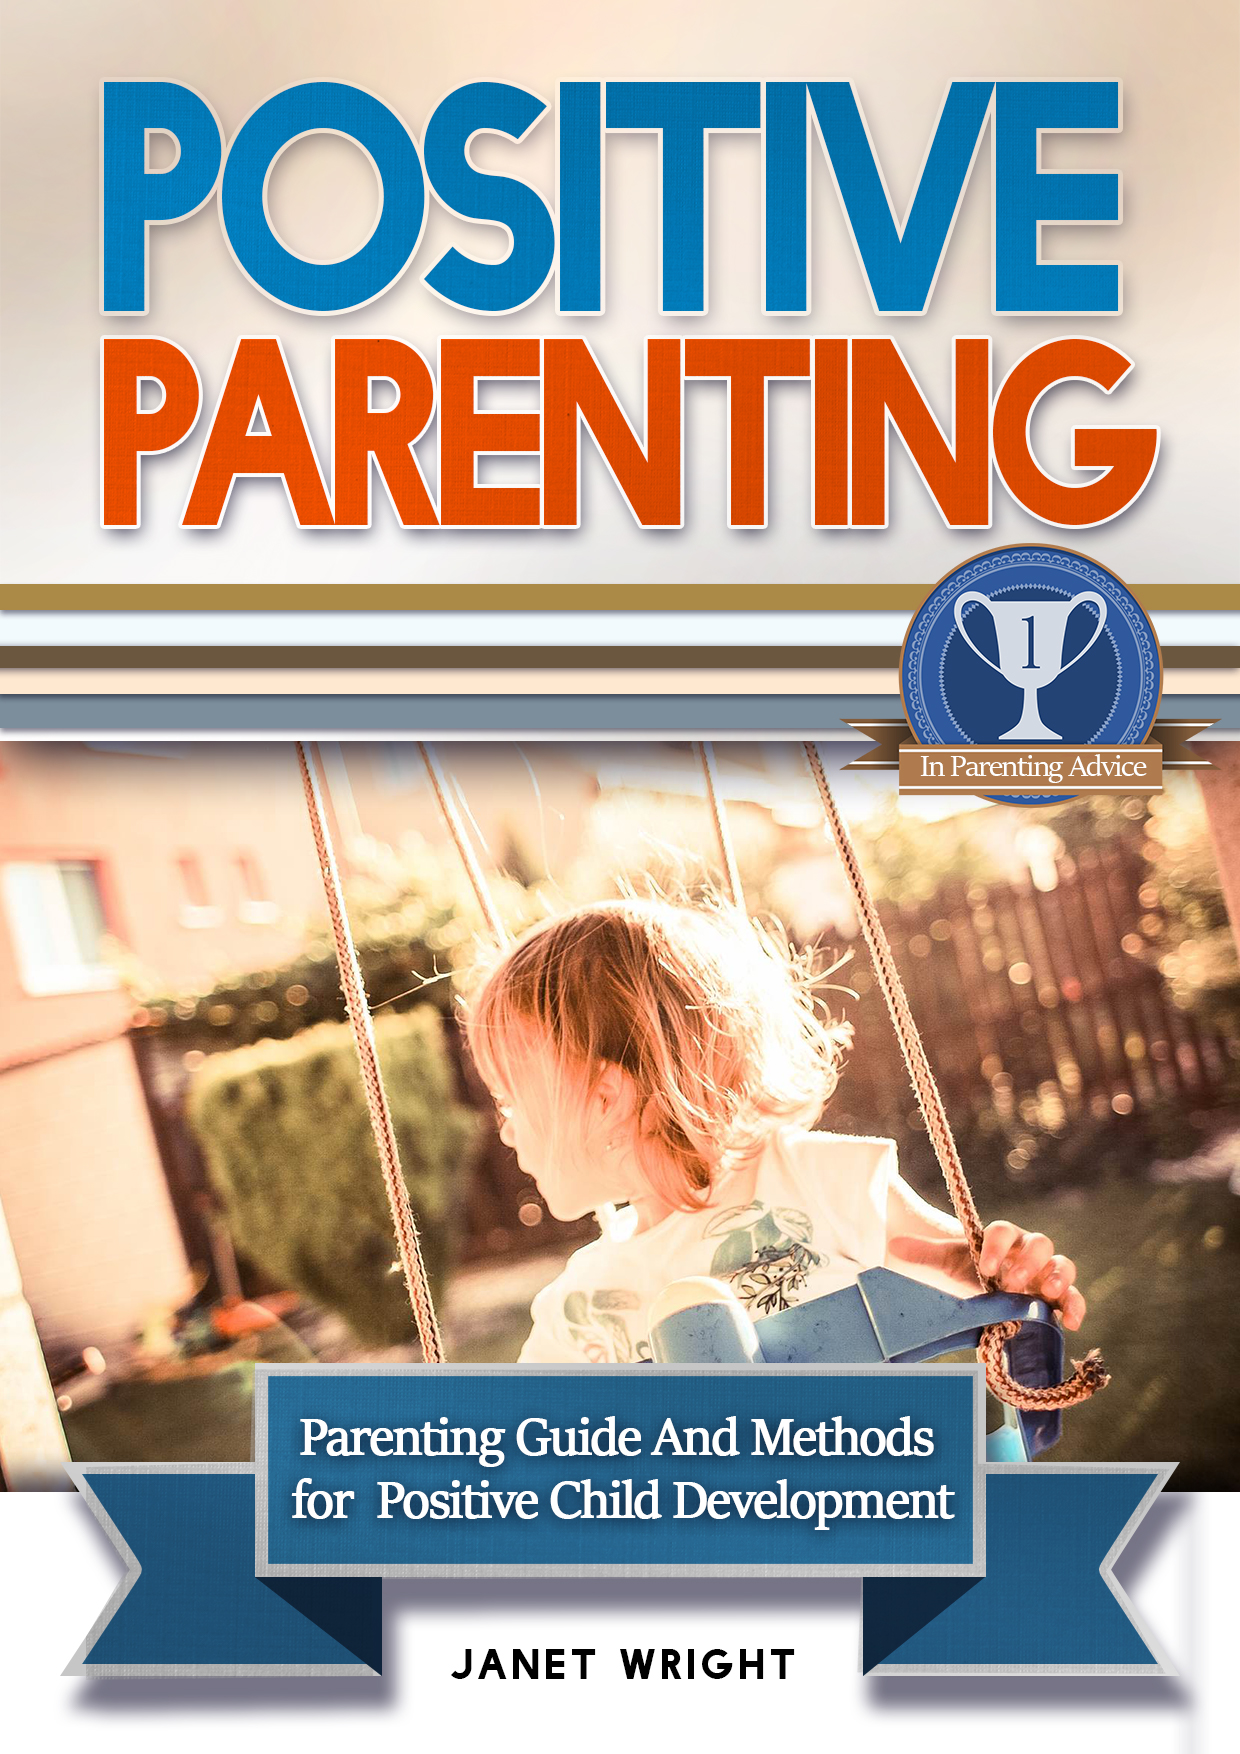 FREE: Positive Parenting: Parenting Guide And Methods For A Positive Child Development by Janet Wright